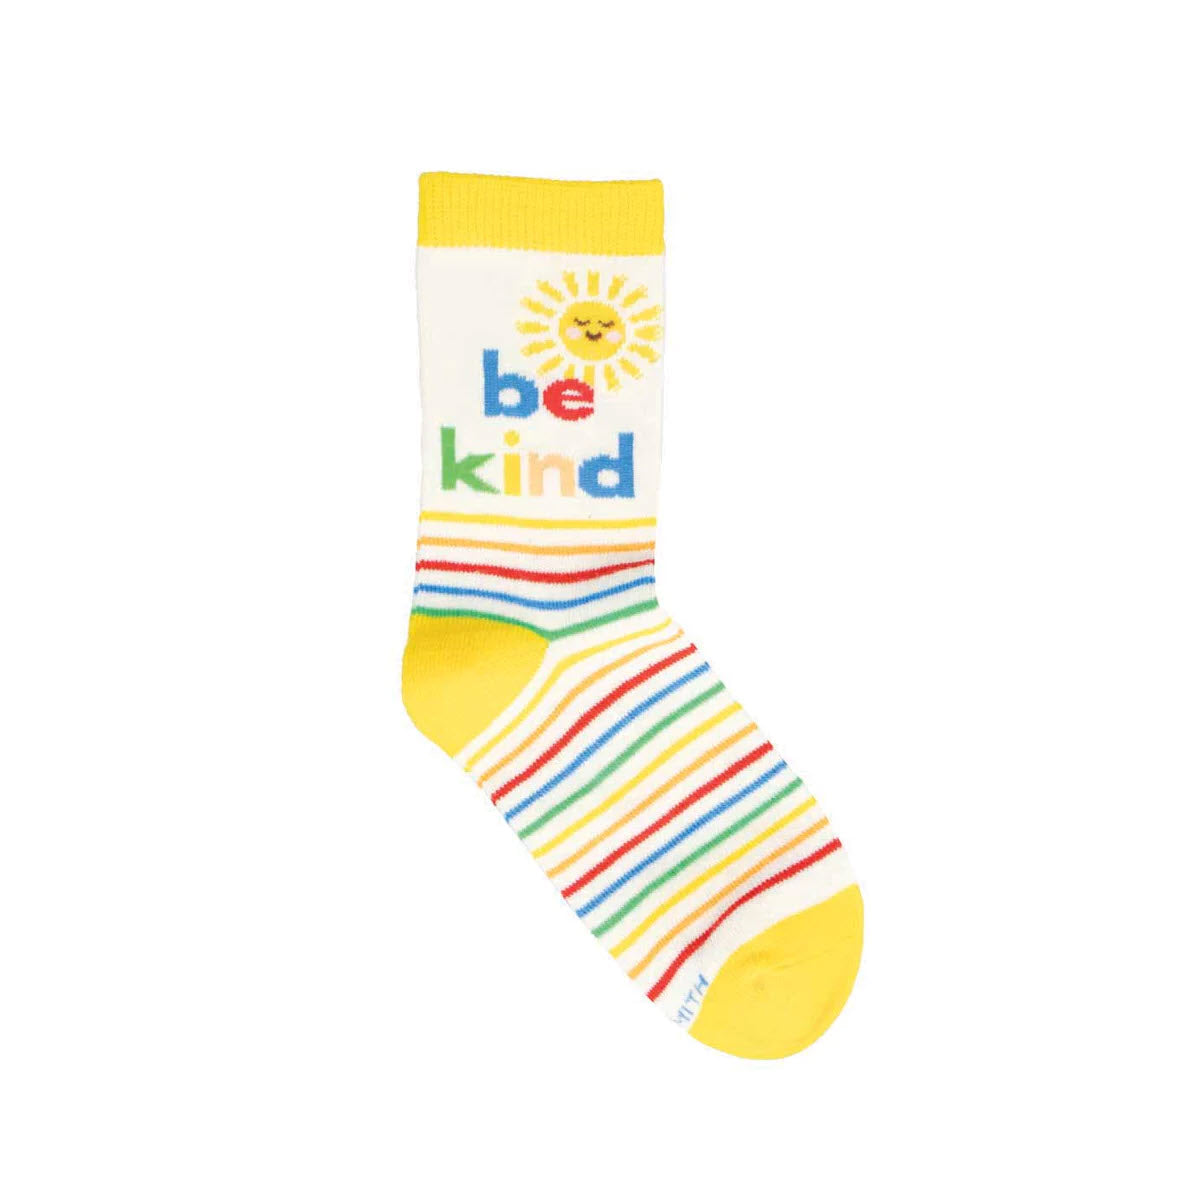 A colorful striped kids sock with "be kind" text and a sun design on a white background, suitable for shoe size 10-1 youth. Check out the Socksmith Be Kind Crew Socks Ivory - Kids.